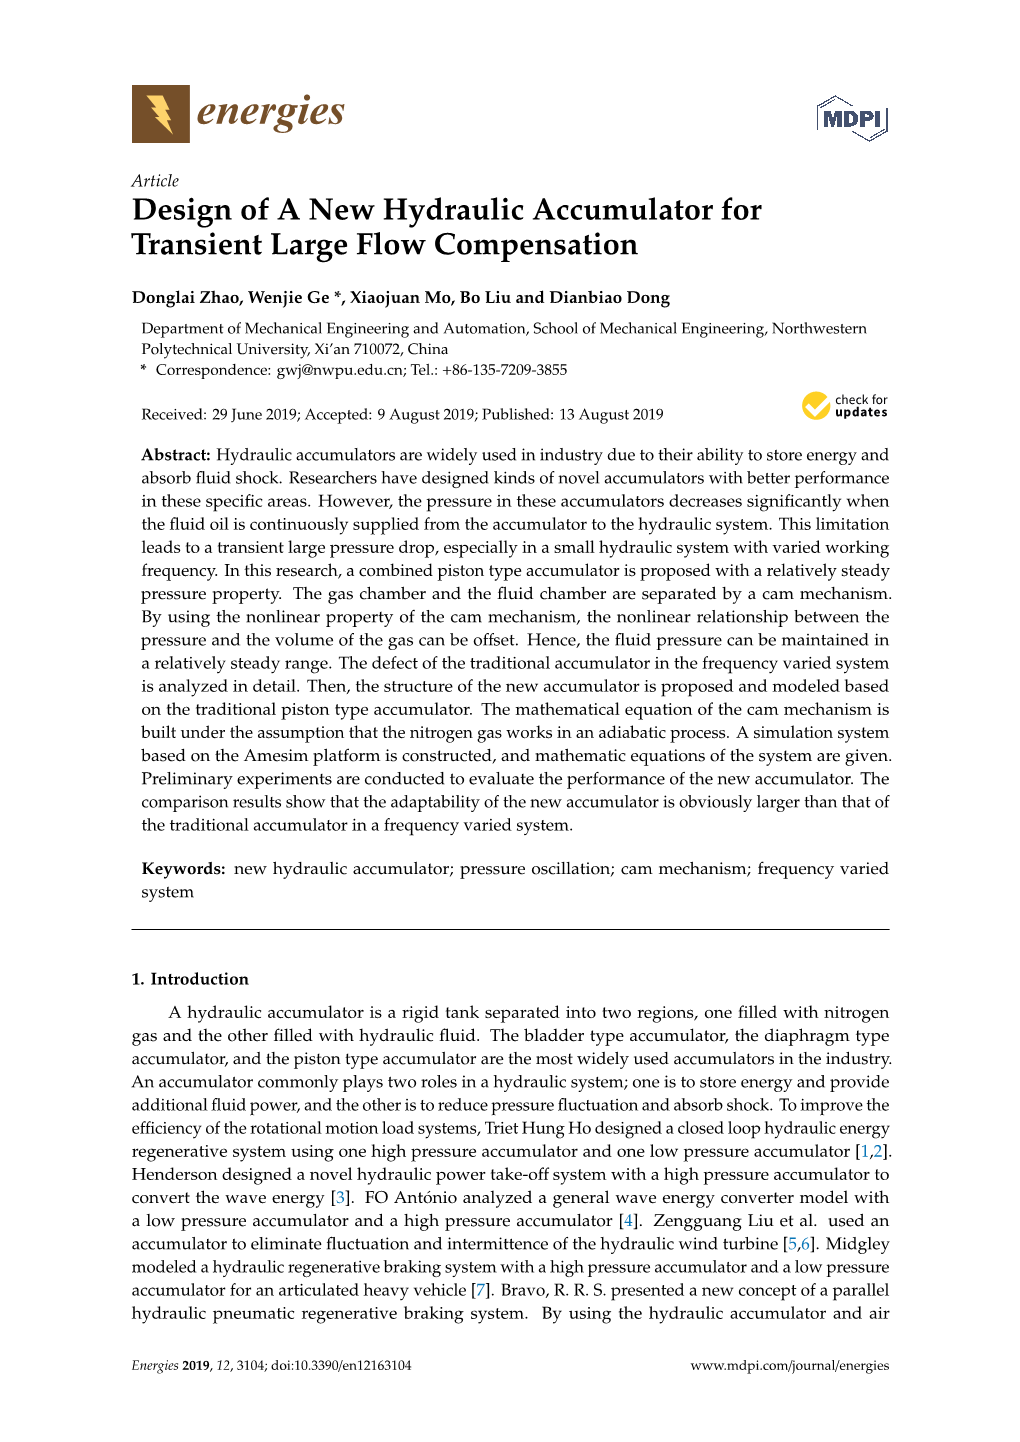 Design of a New Hydraulic Accumulator for Transient Large Flow Compensation